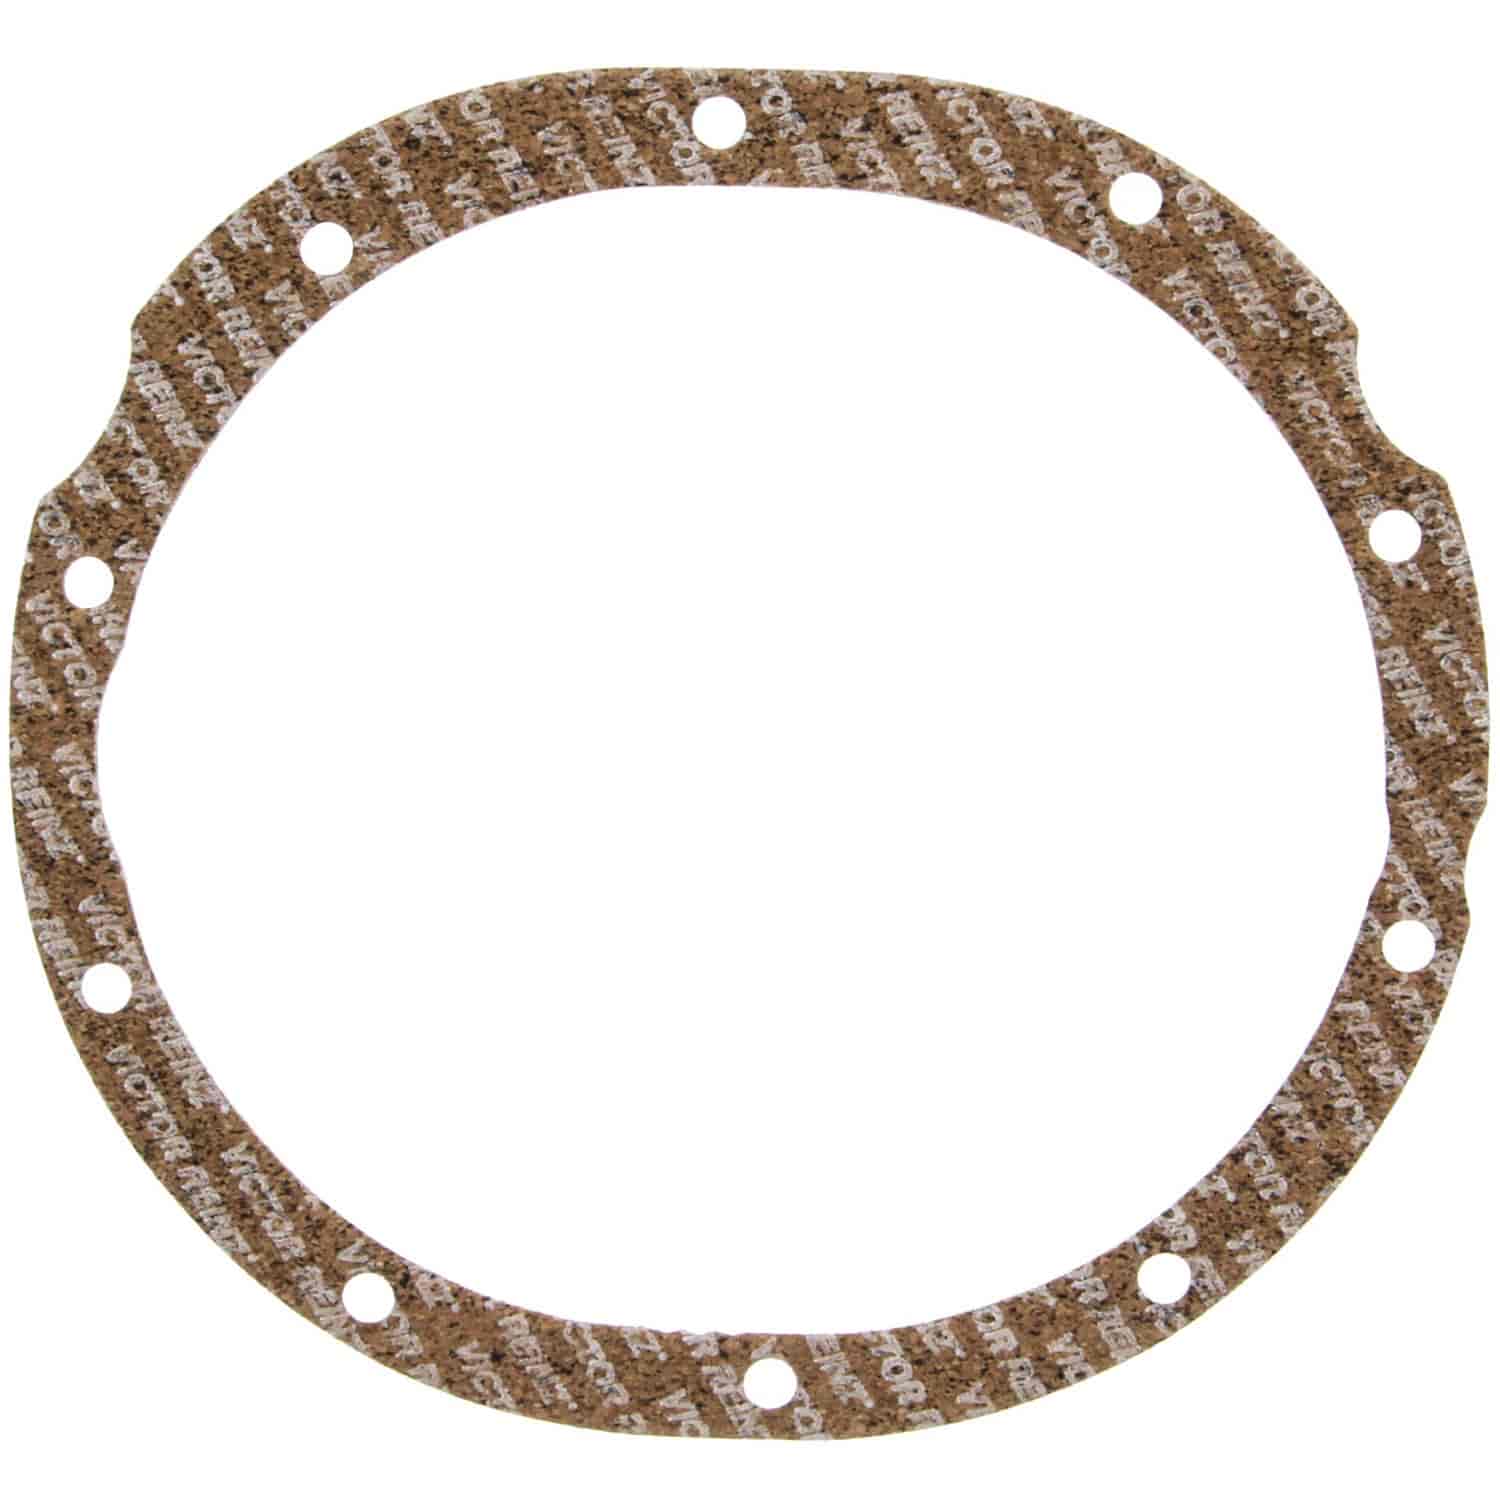 Differential Carrier Gasket Bui Chev GMC Olds Pont